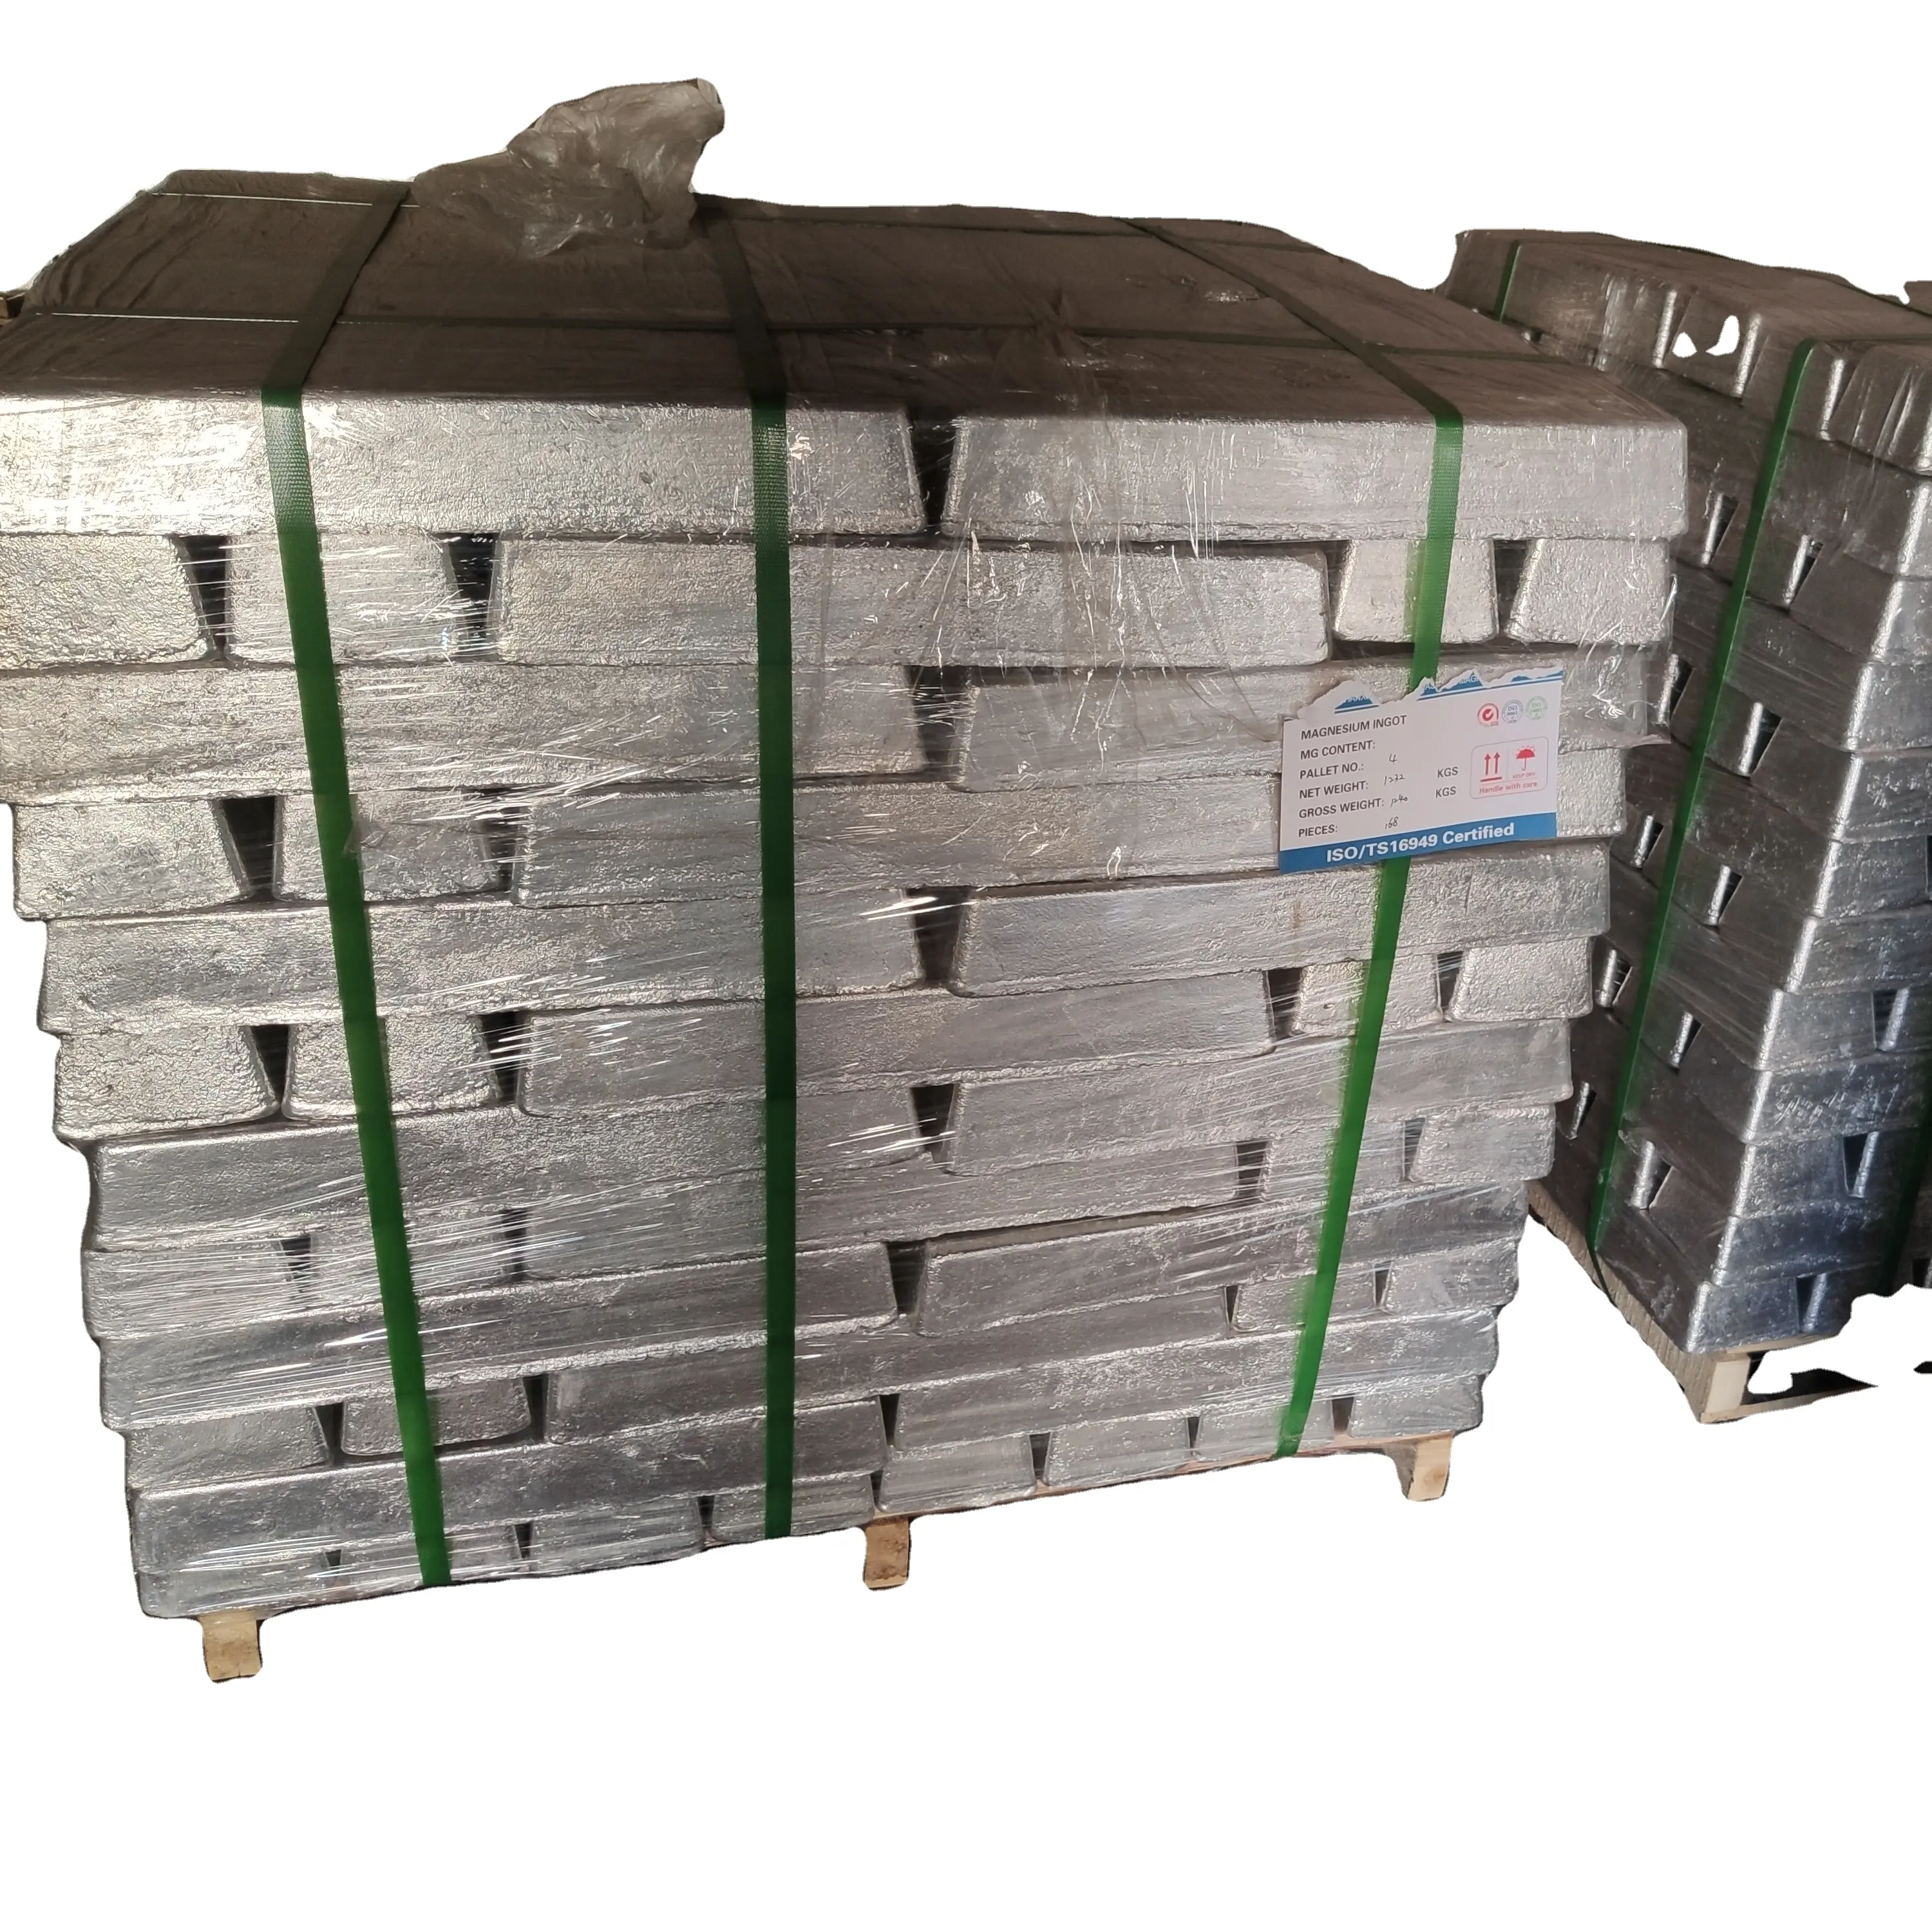 Large stocks of high purity magnesium ingot are available from Chinese suppliers